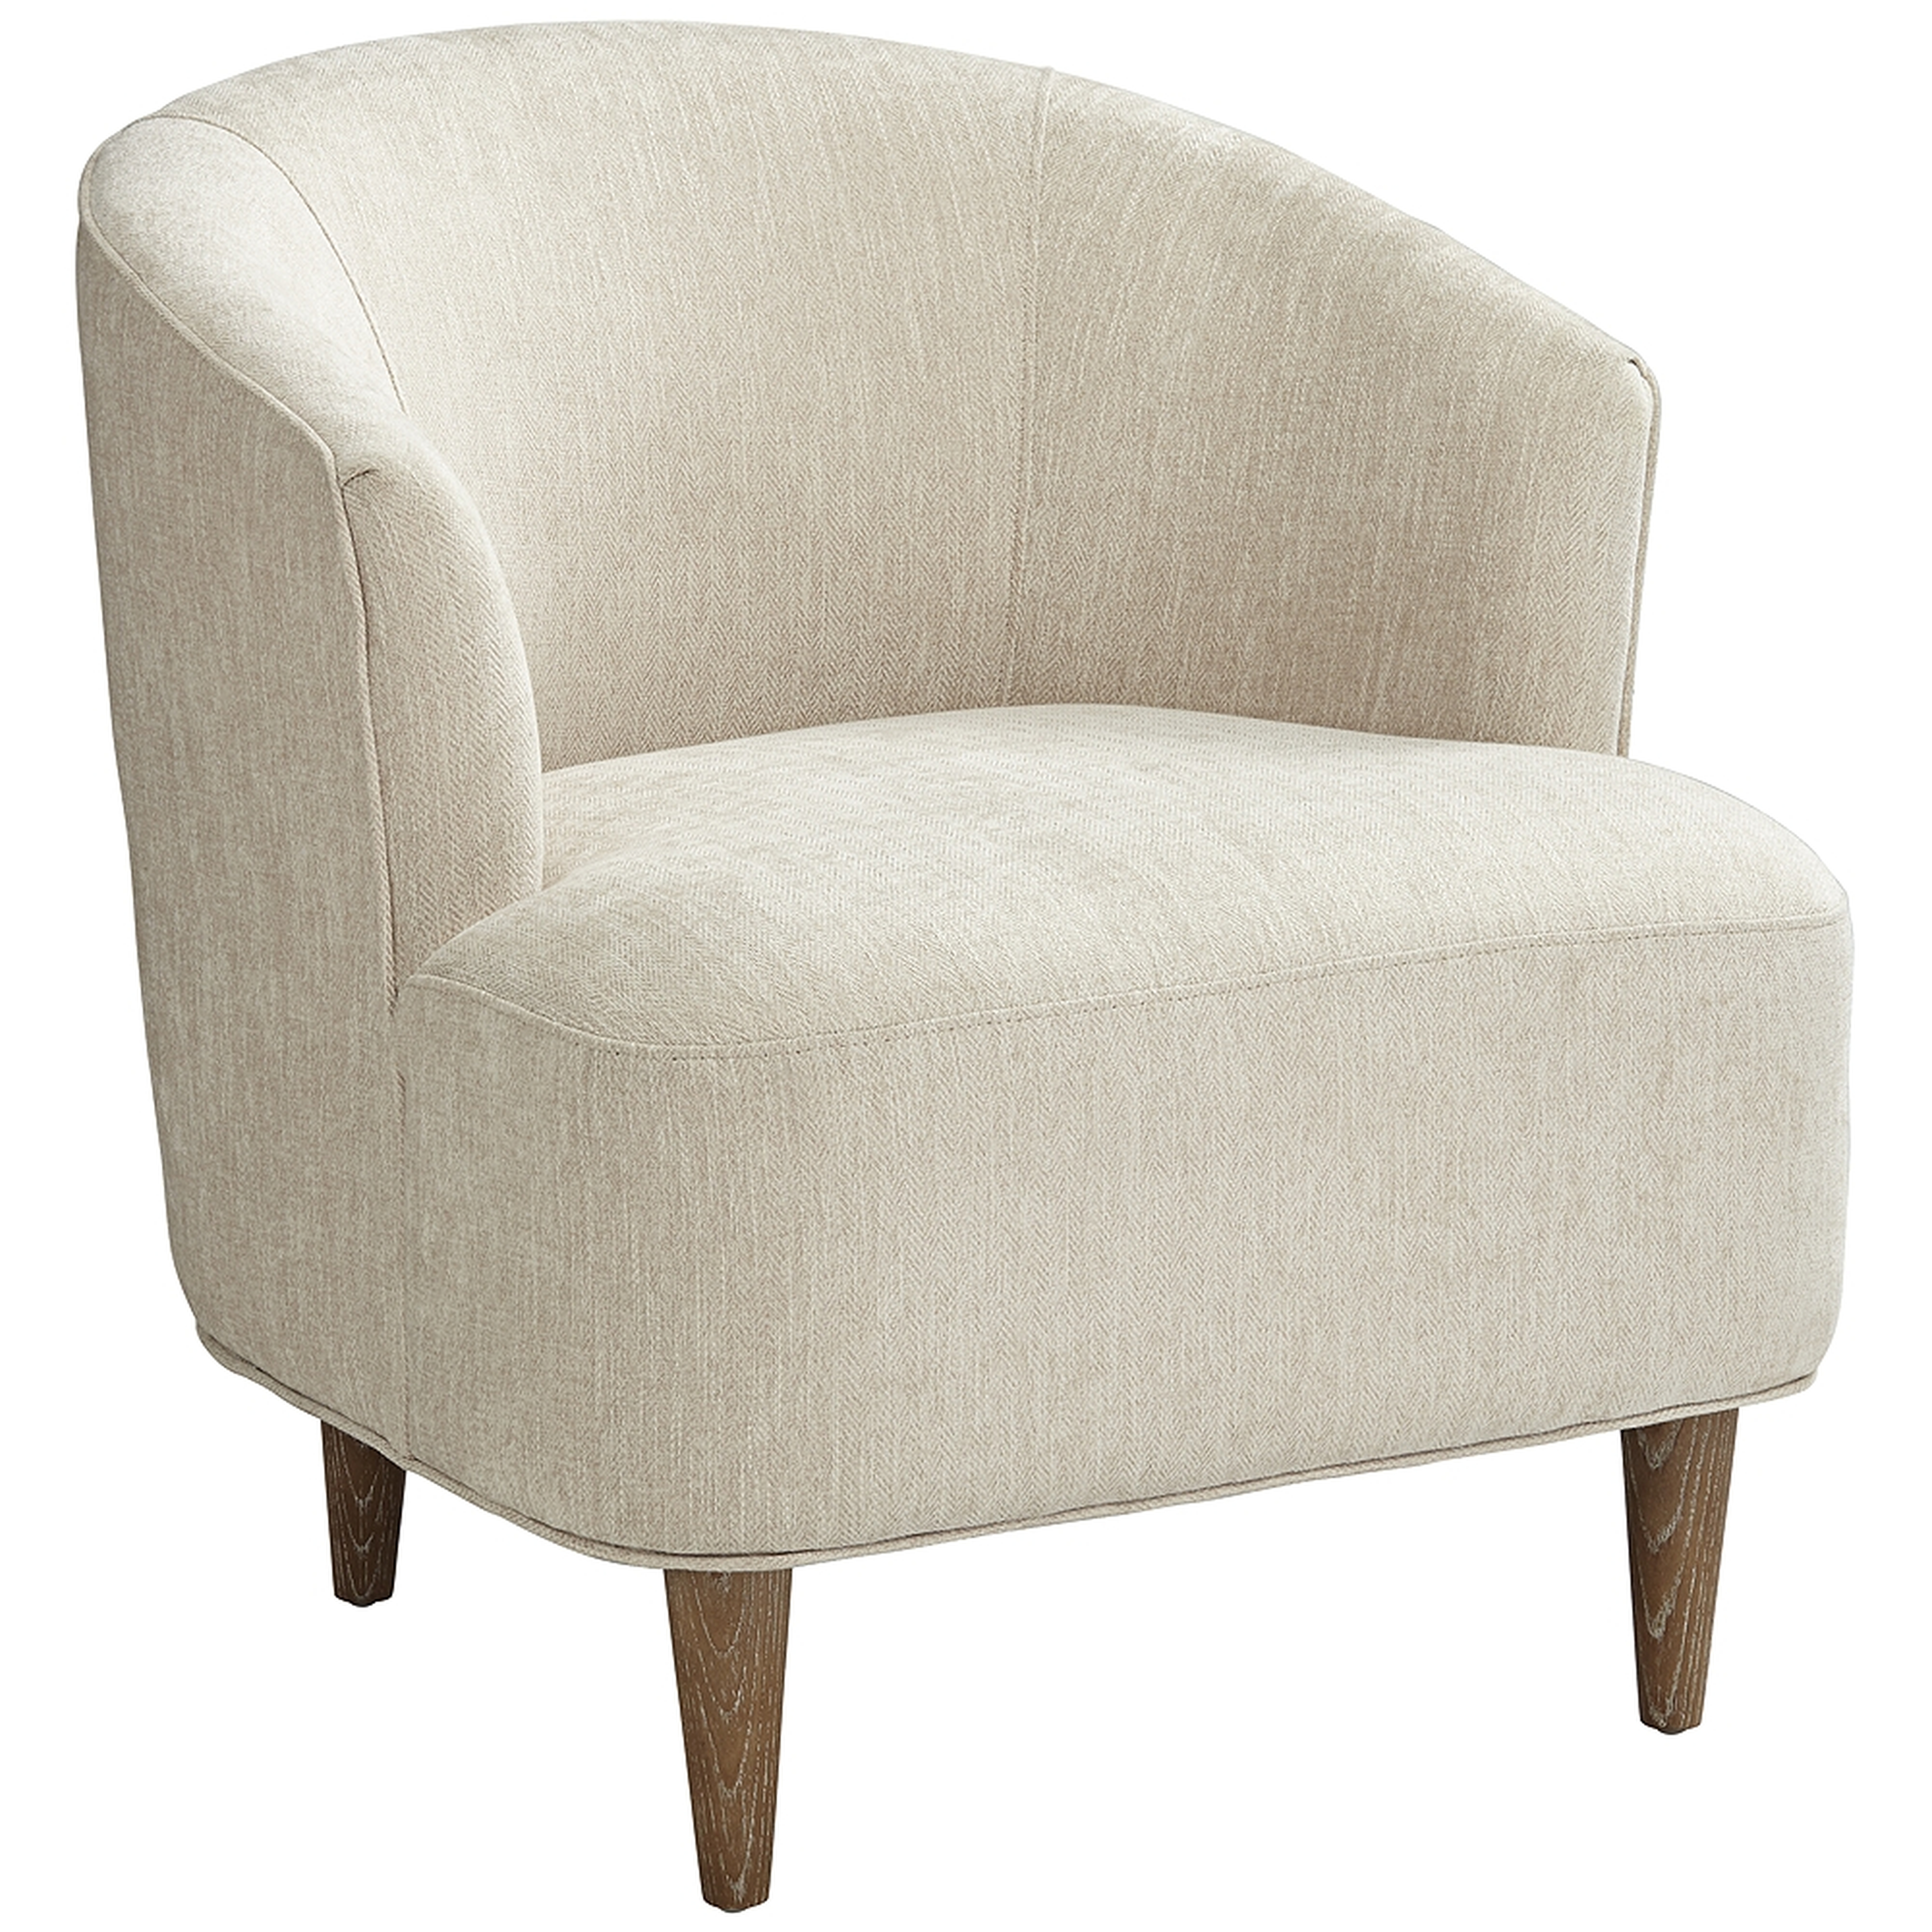 Herringbone Beige Fabric Accent Chair - Style # 79D20 - Lamps Plus